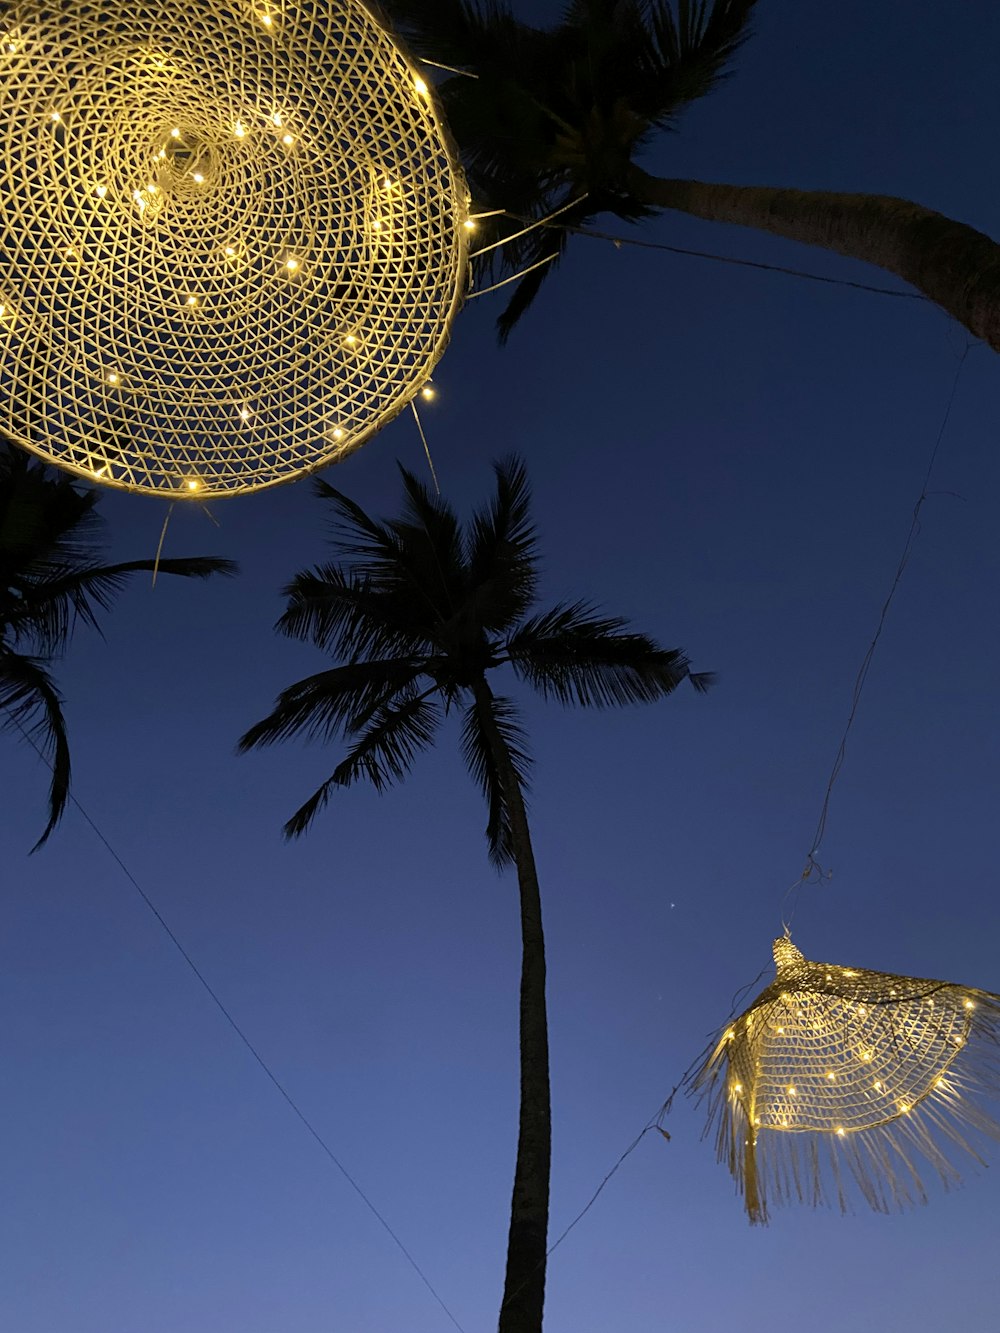 a couple of palm trees with lights hanging from them